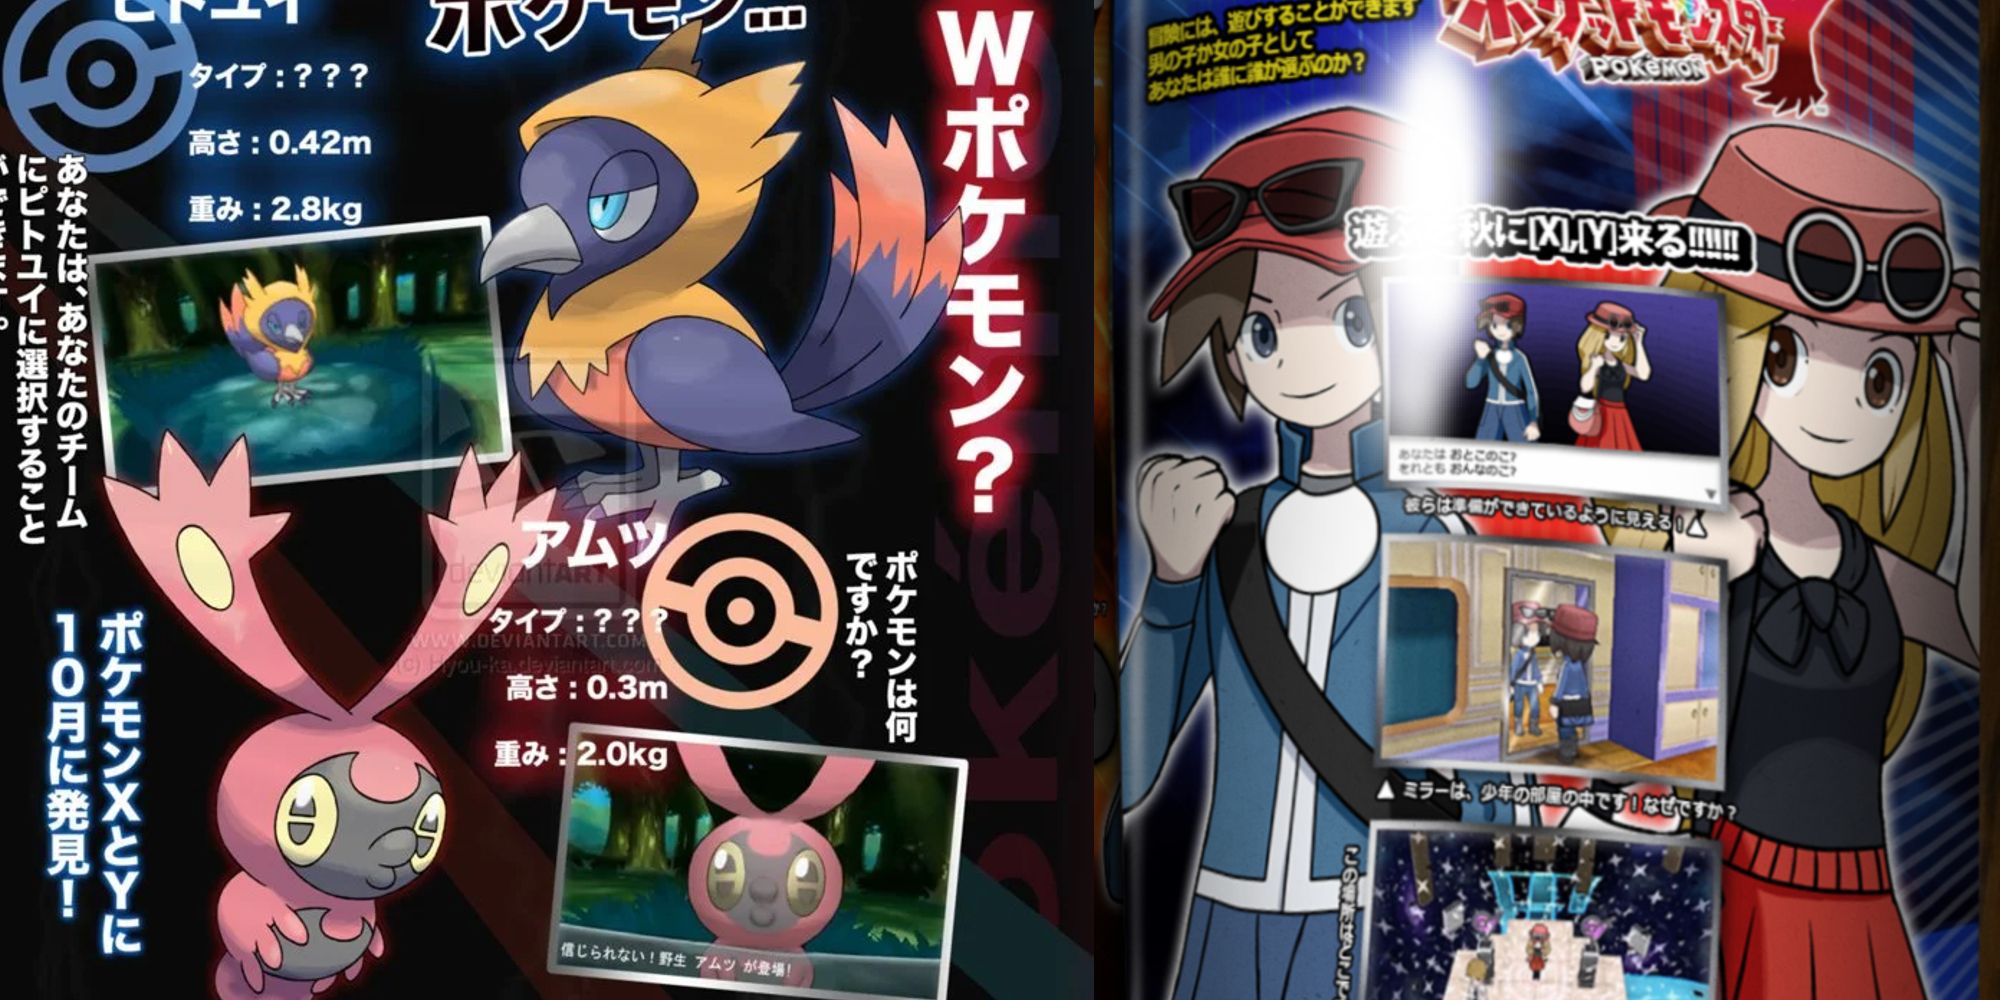 Two fake Corocoro leaks for X & Y depicting a hooded raven Pokemon, a pink bug Pokemon, and Trainer artwork